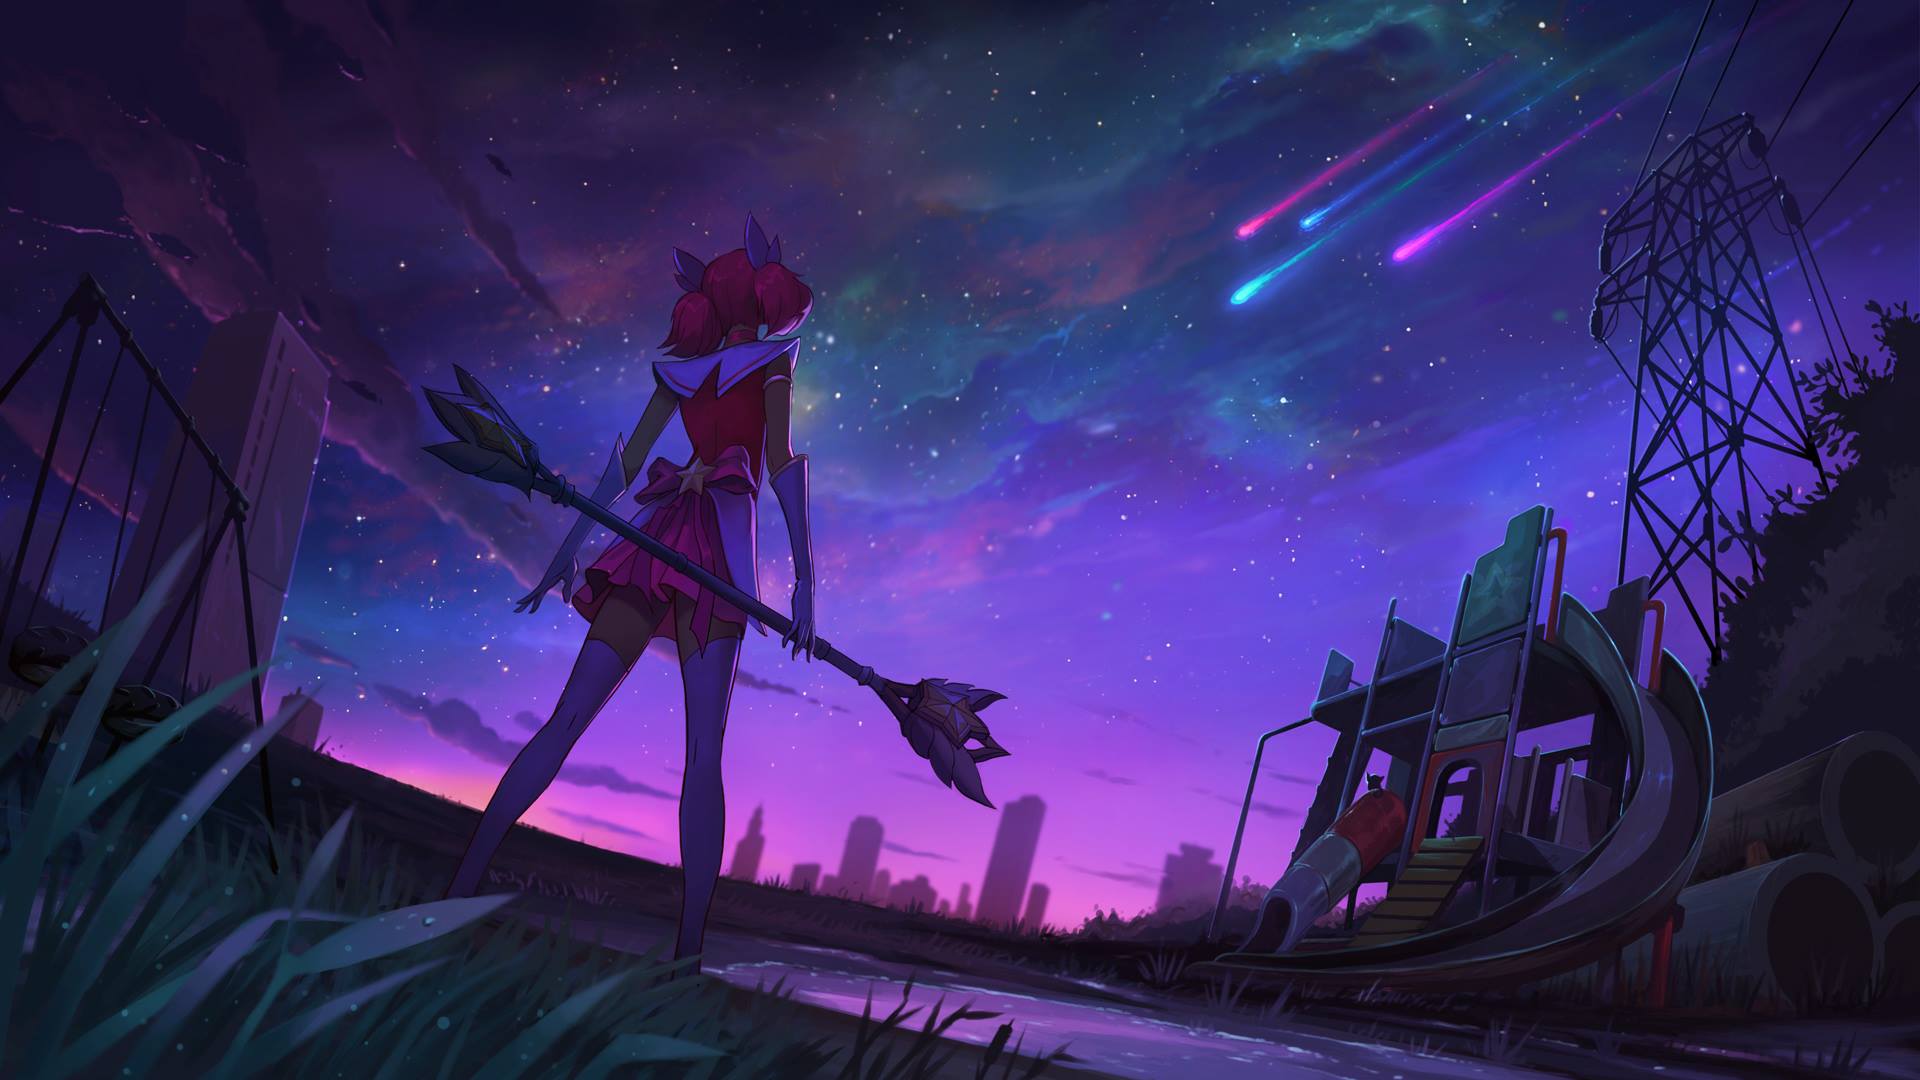 Surrender at 20: "You are not alone." Star Guardian Teaser